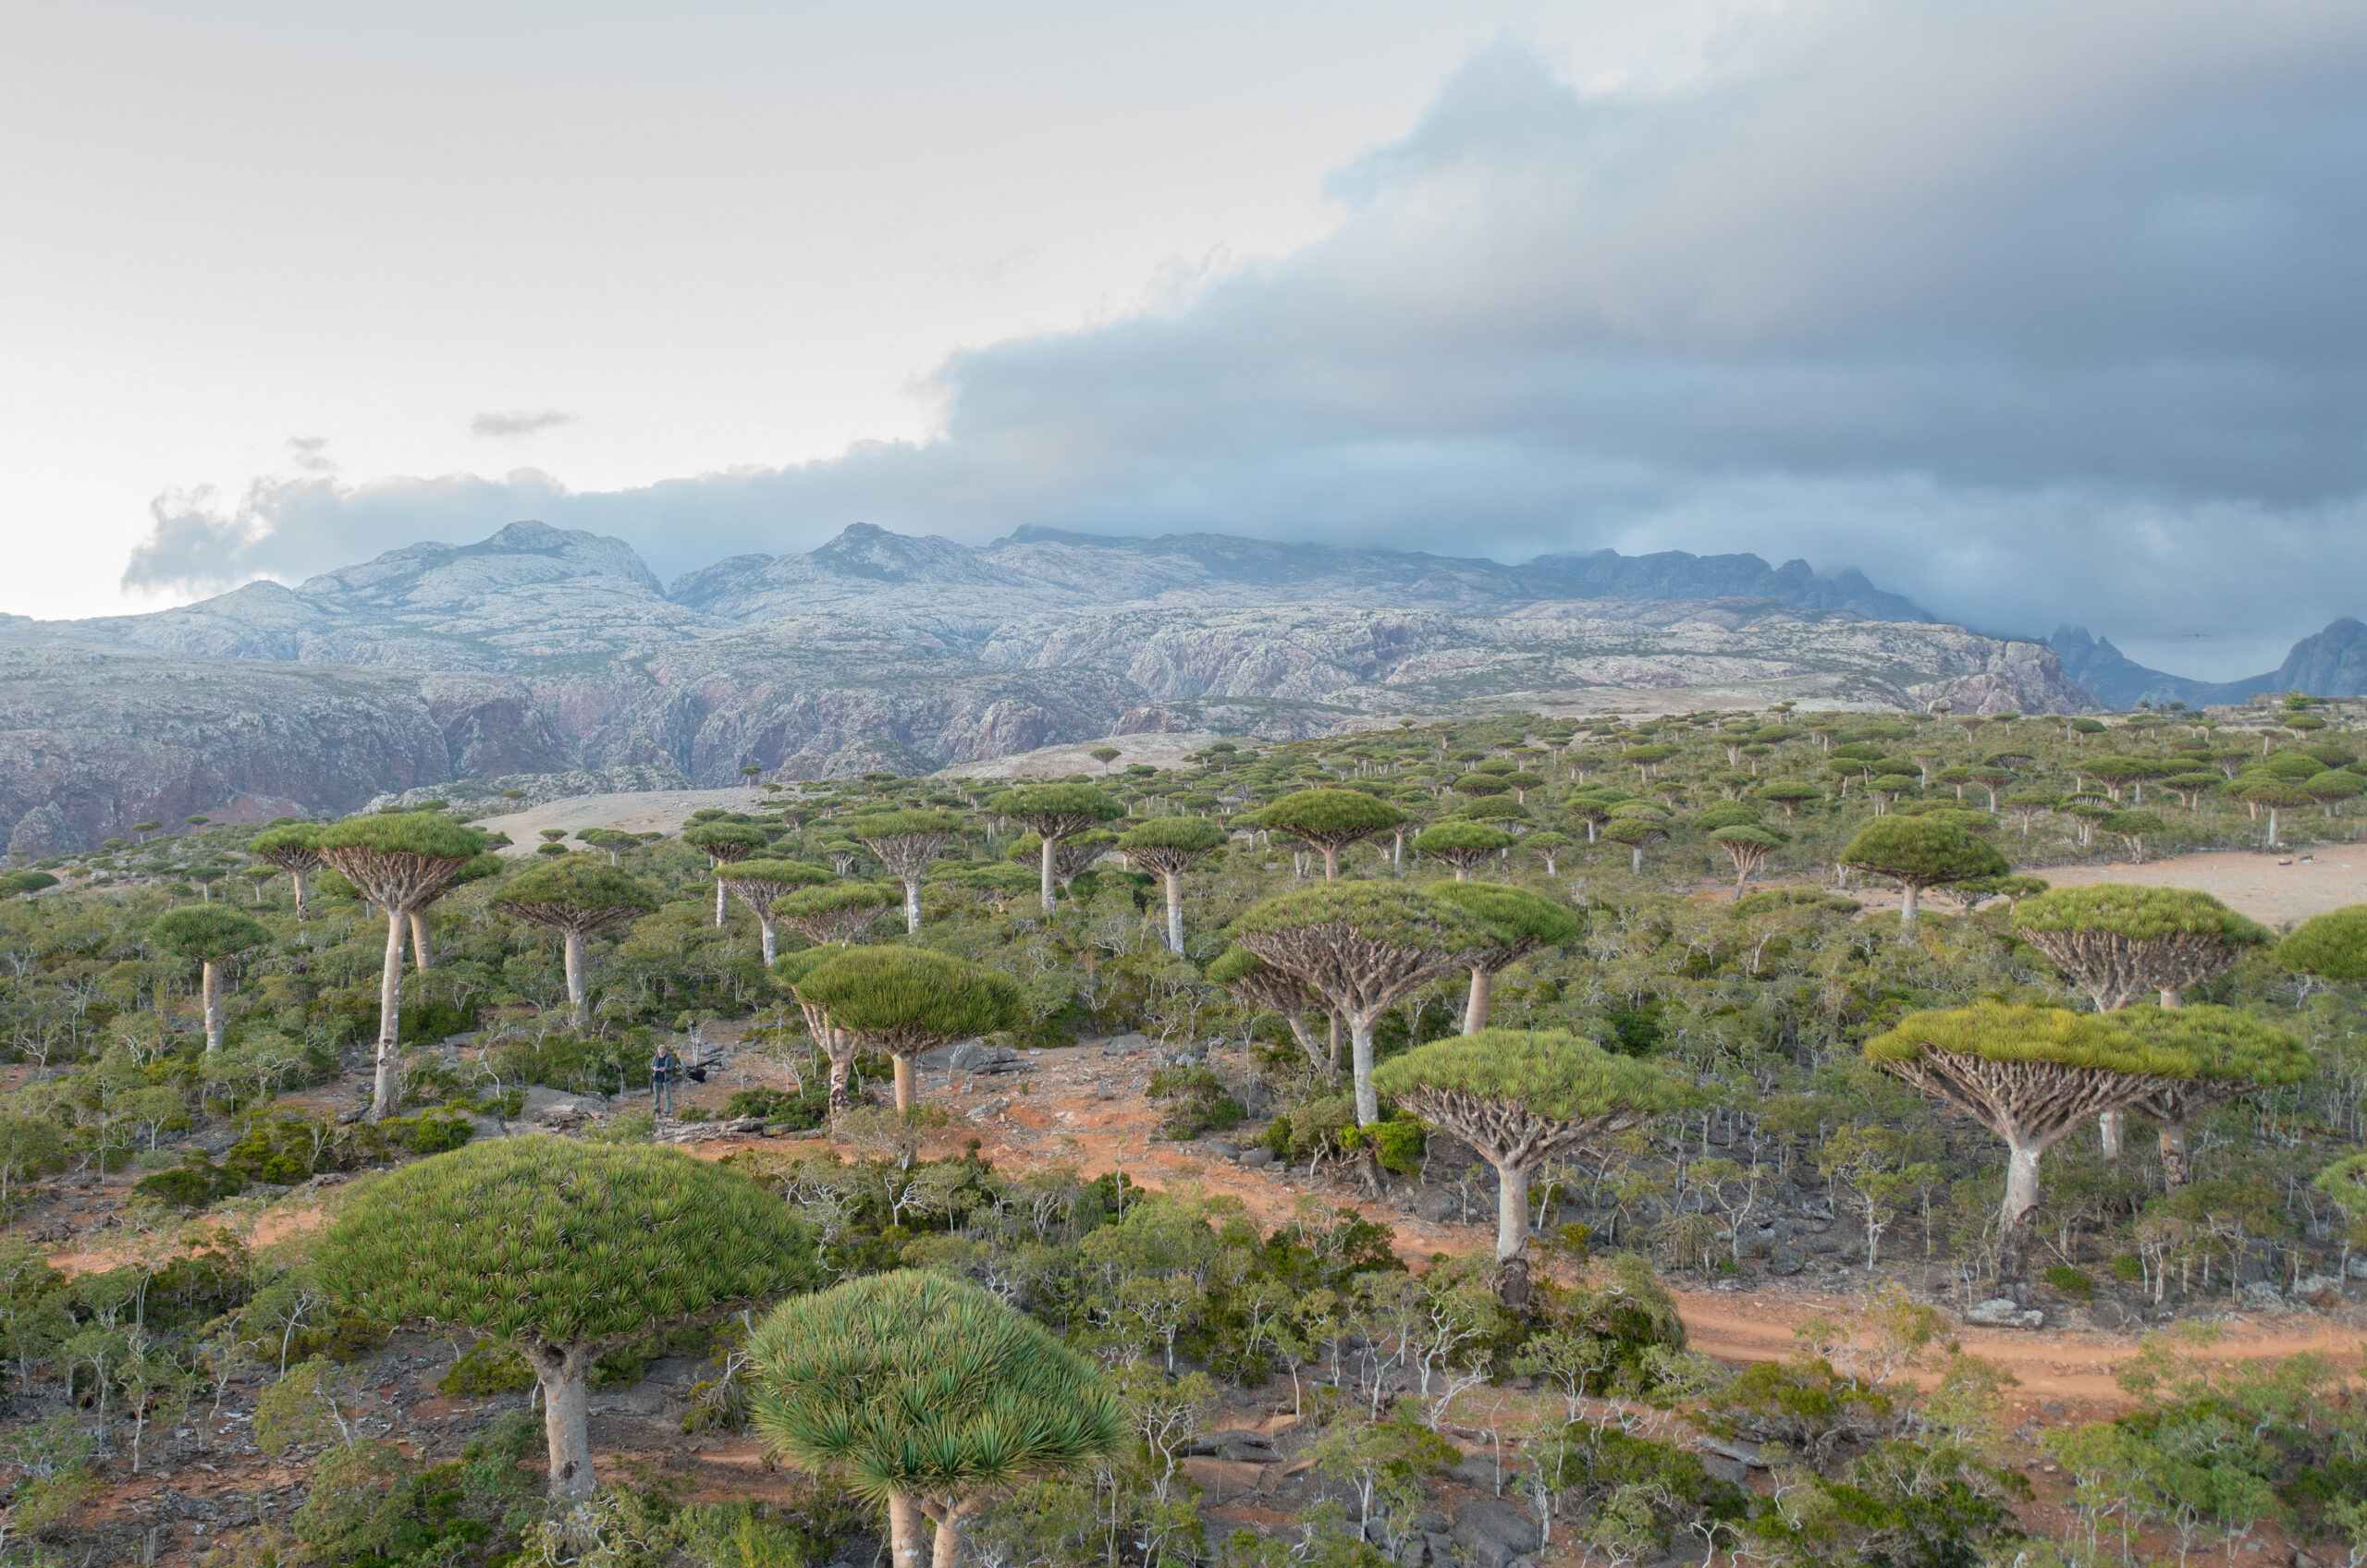 Firhmin Forest, Socotra